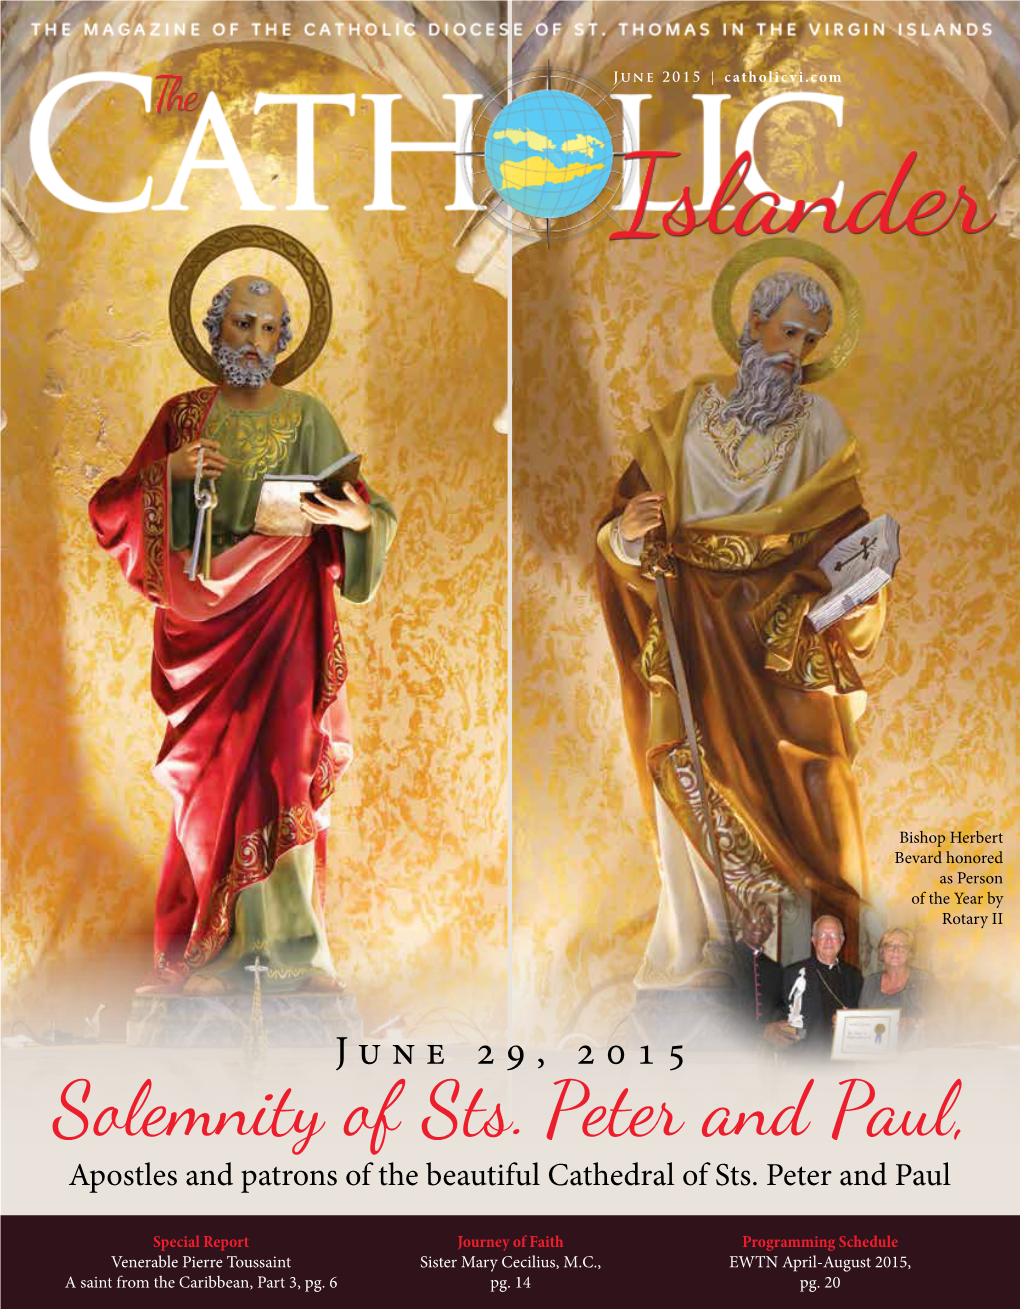 Solemnity of Sts. Peter and Paul, Apostles and Patrons of the Beautiful Cathedral of Sts